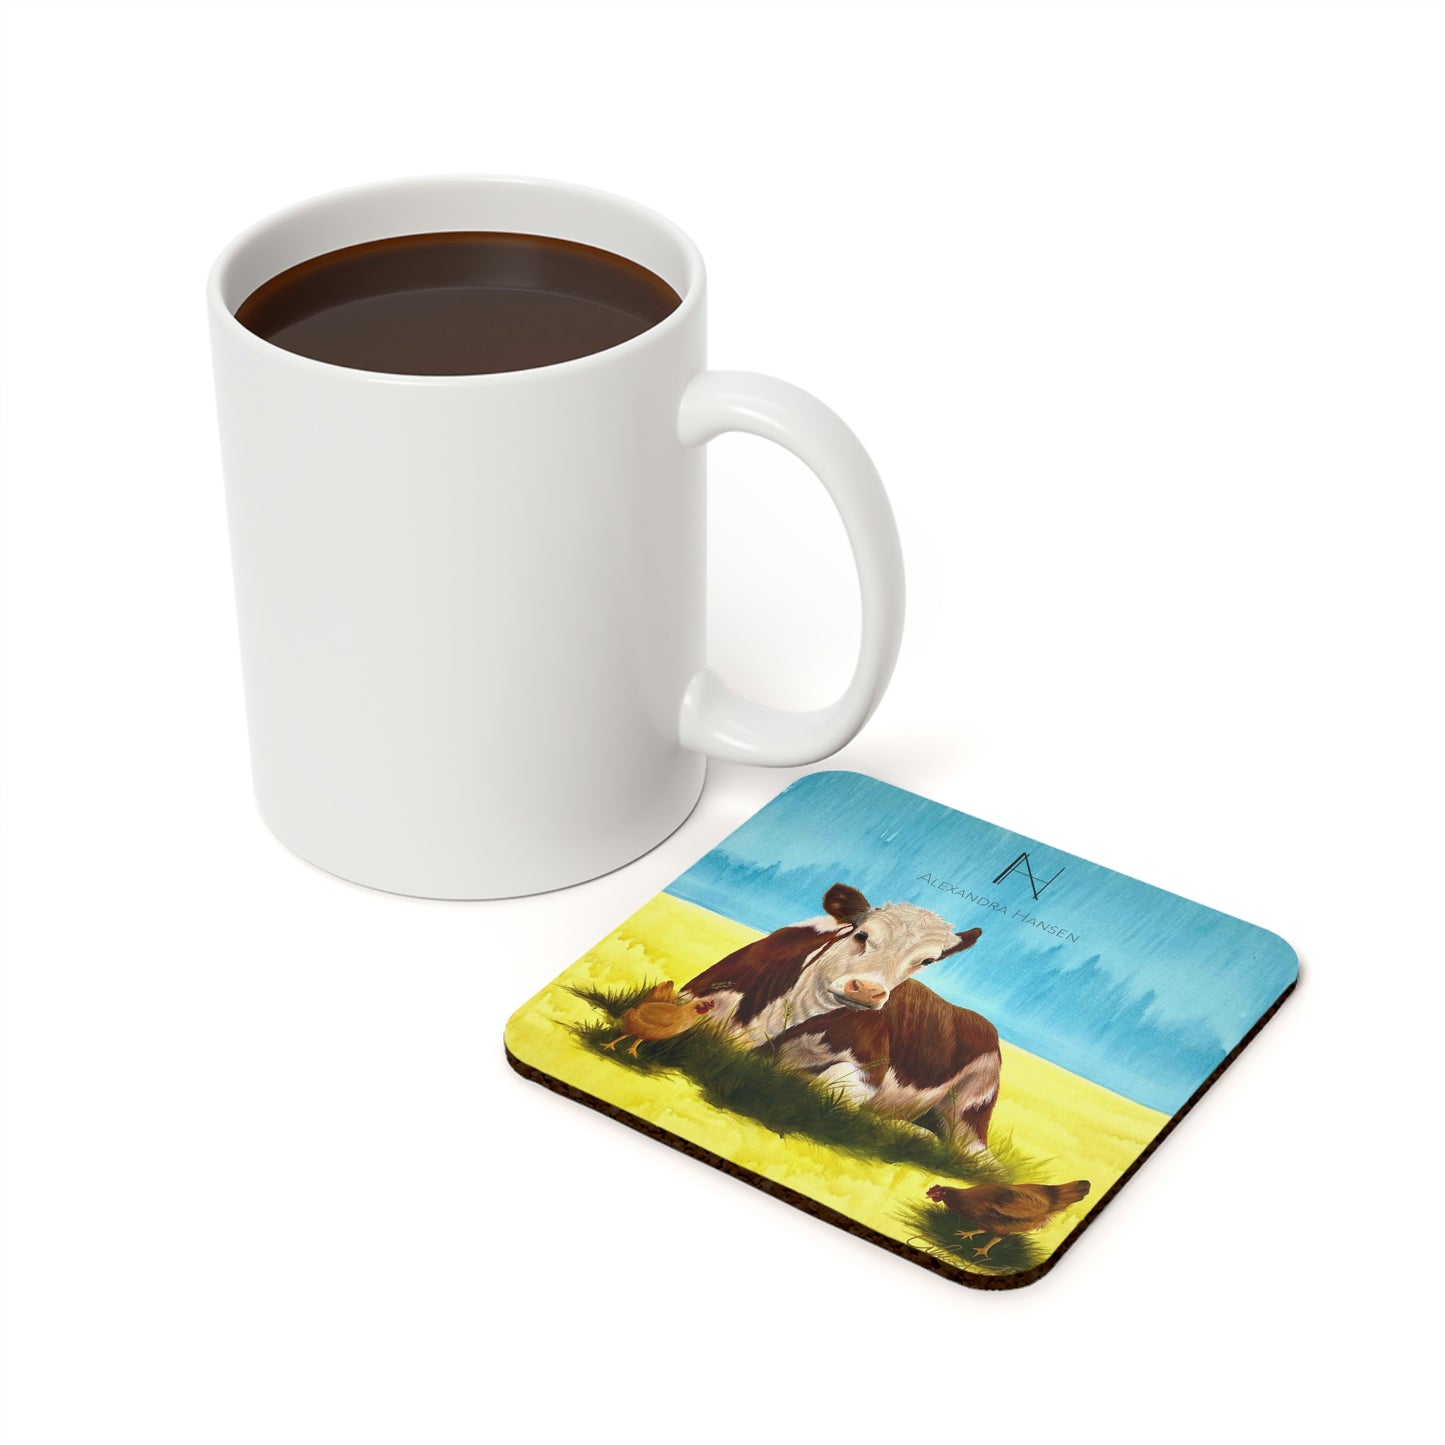 Hereford Cow Coaster